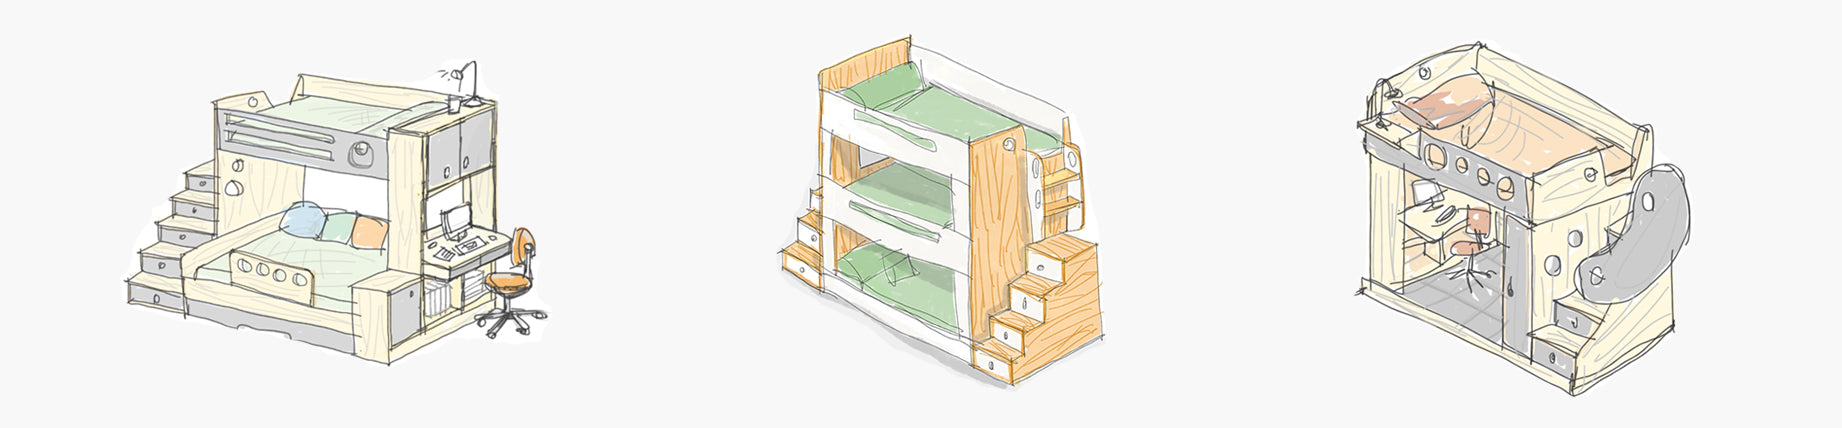 A drawing of a bunk bed